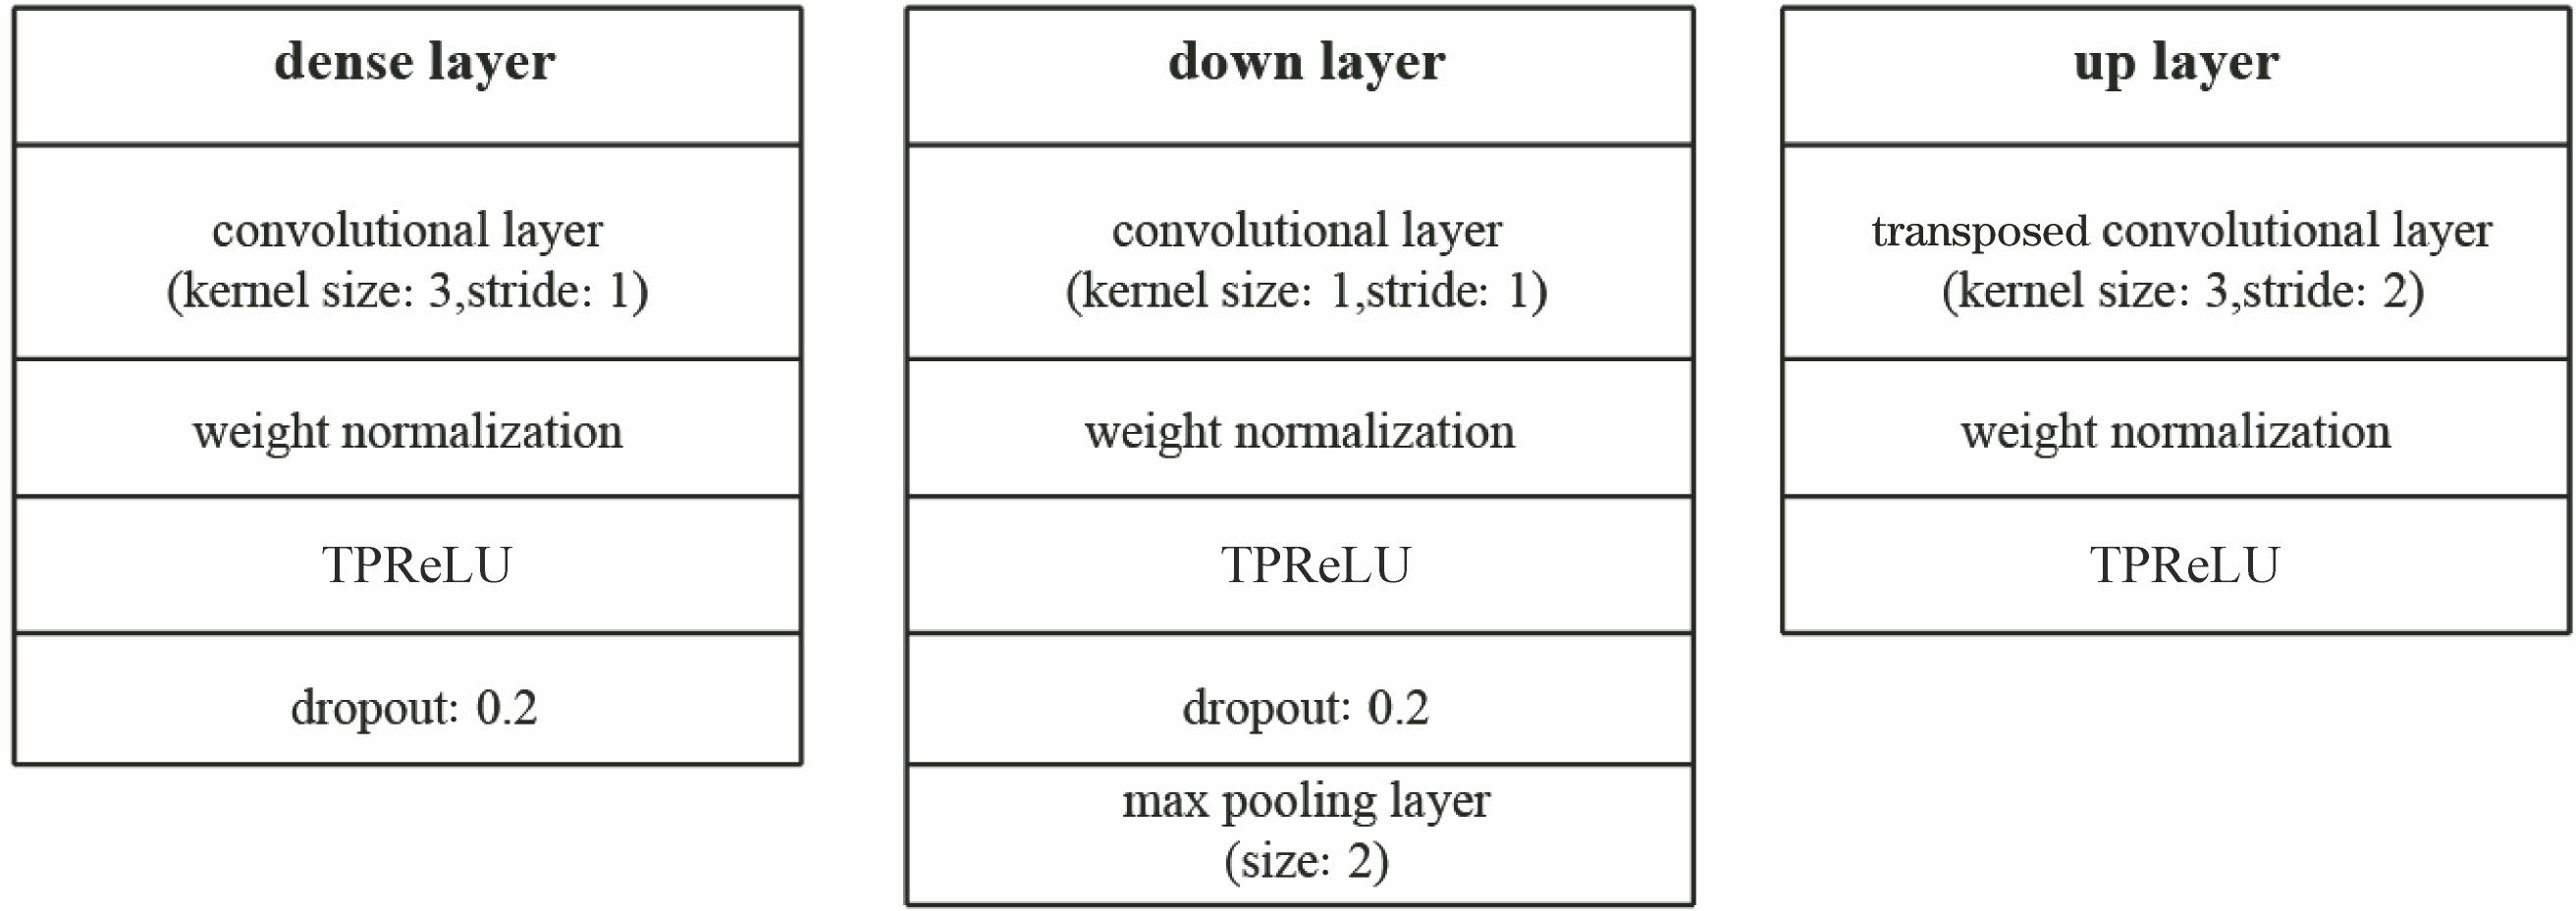 Structure of layers